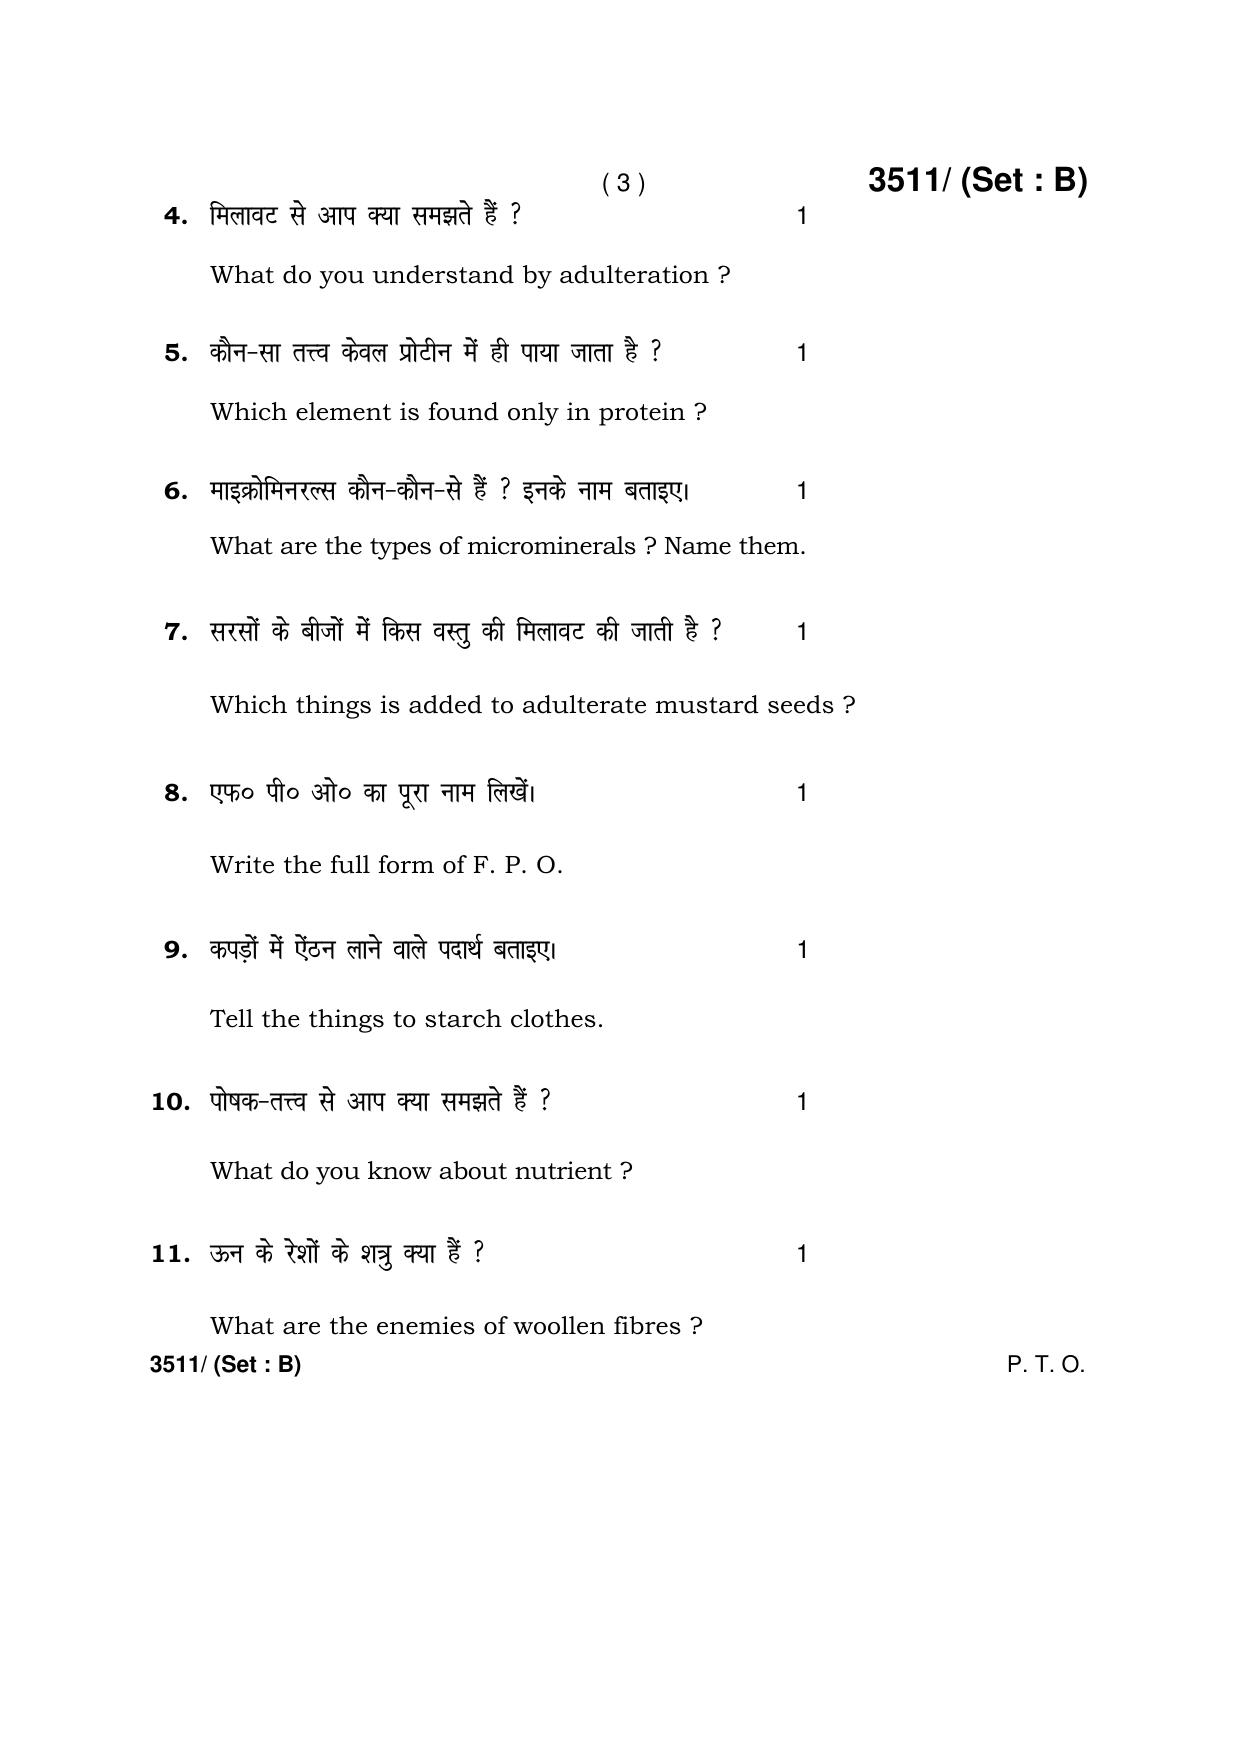 Haryana Board HBSE Class 10 Home Science -B 2018 Question Paper - Page 3